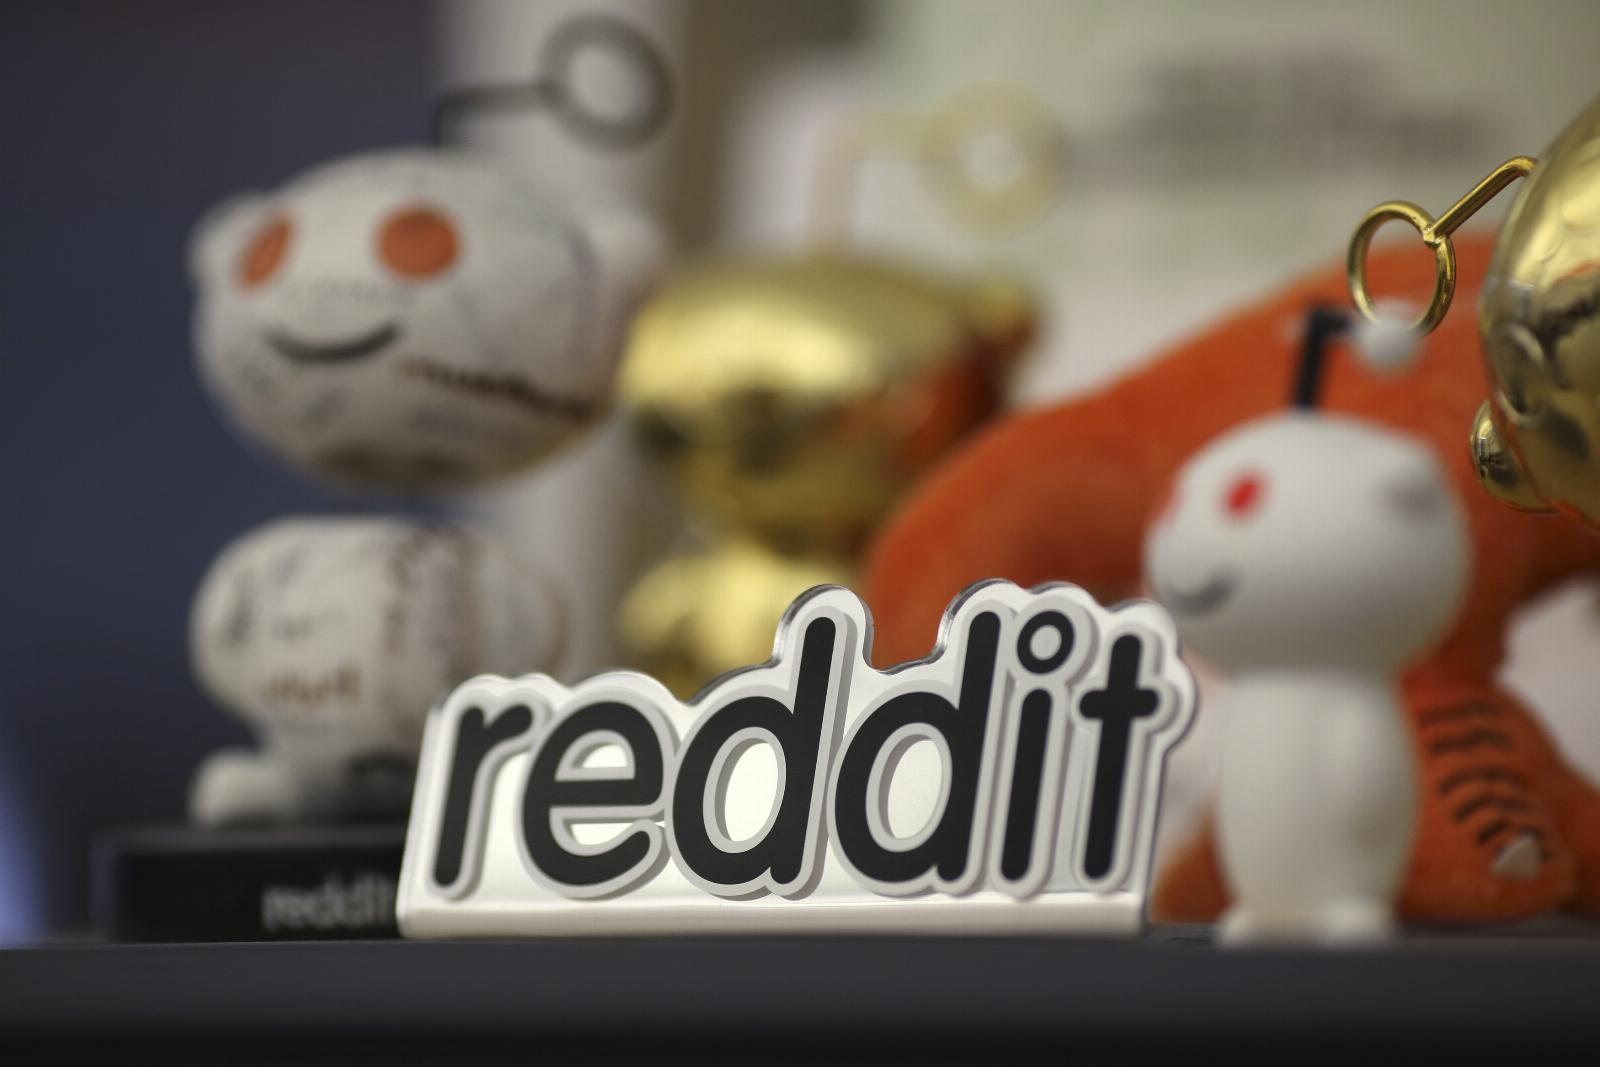 Third-party Reddit app Narwhal hopes to survive Reddit’s app purge with a subscription plan